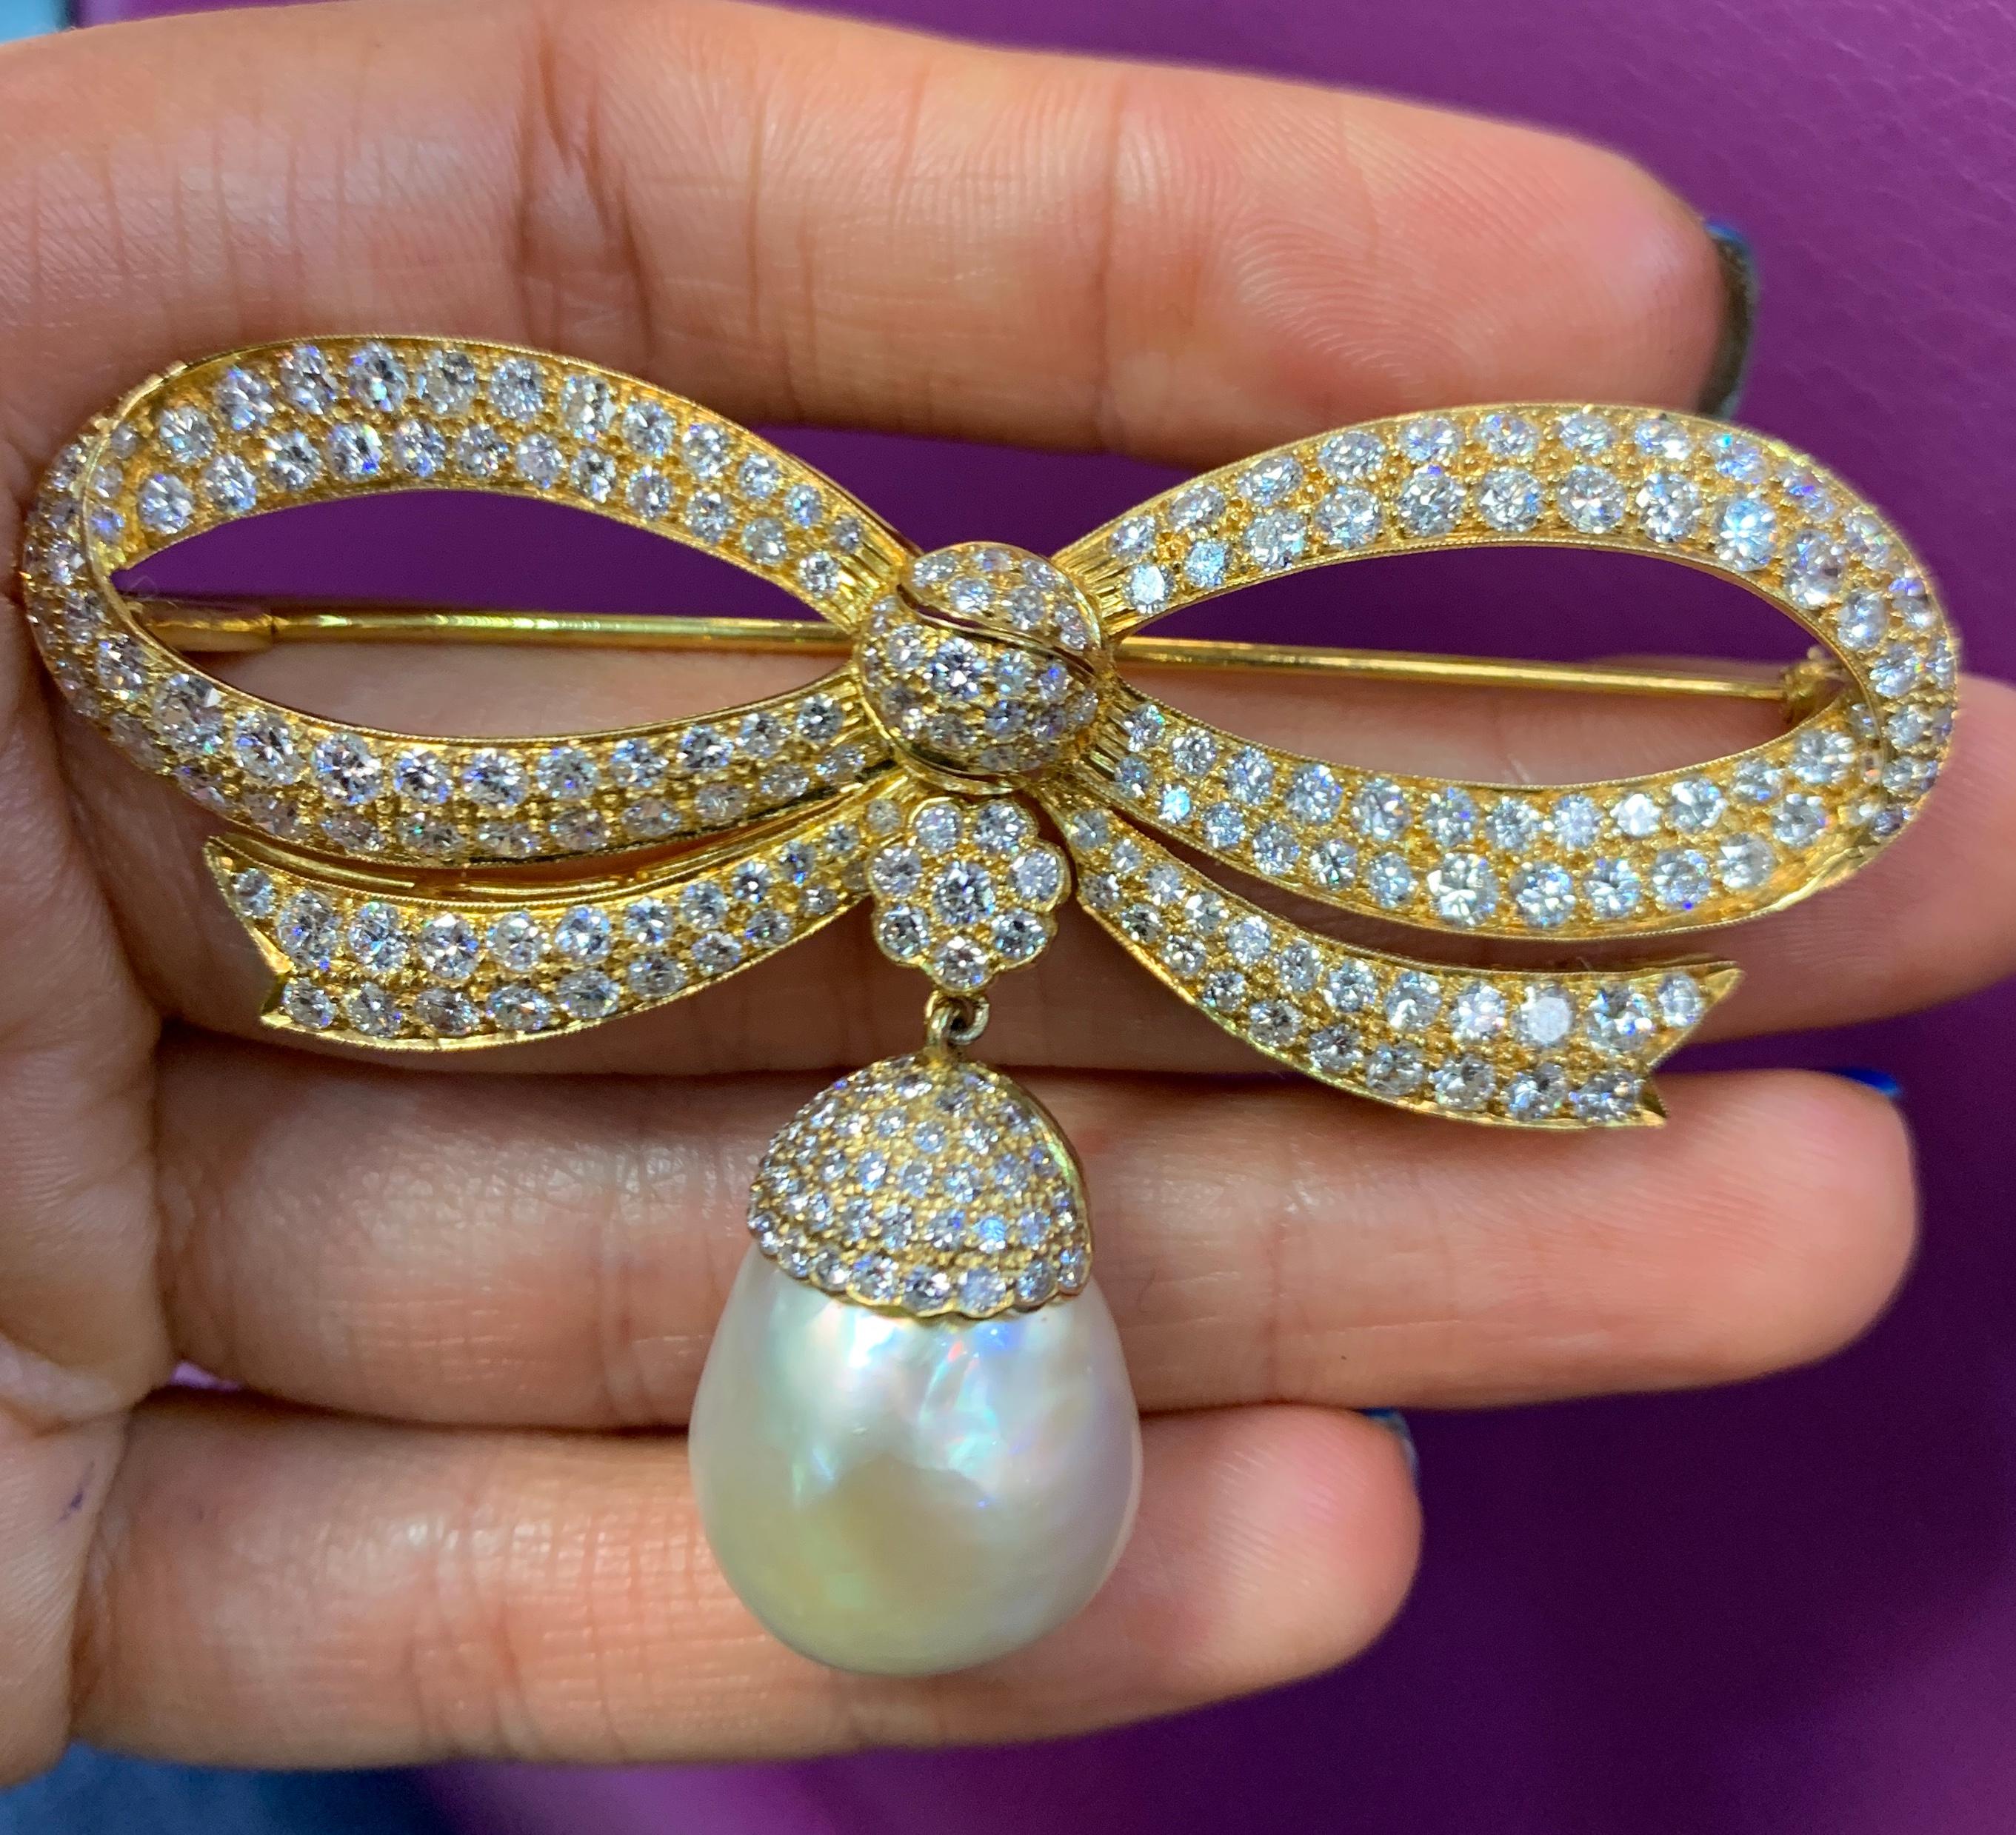 Pave Diamond Bow & Pearl Brooch
Diamond Weight: Approximately 5.50 Cts 
Set with one cultured pearl
14 karat gold 
Measurements: 2.5